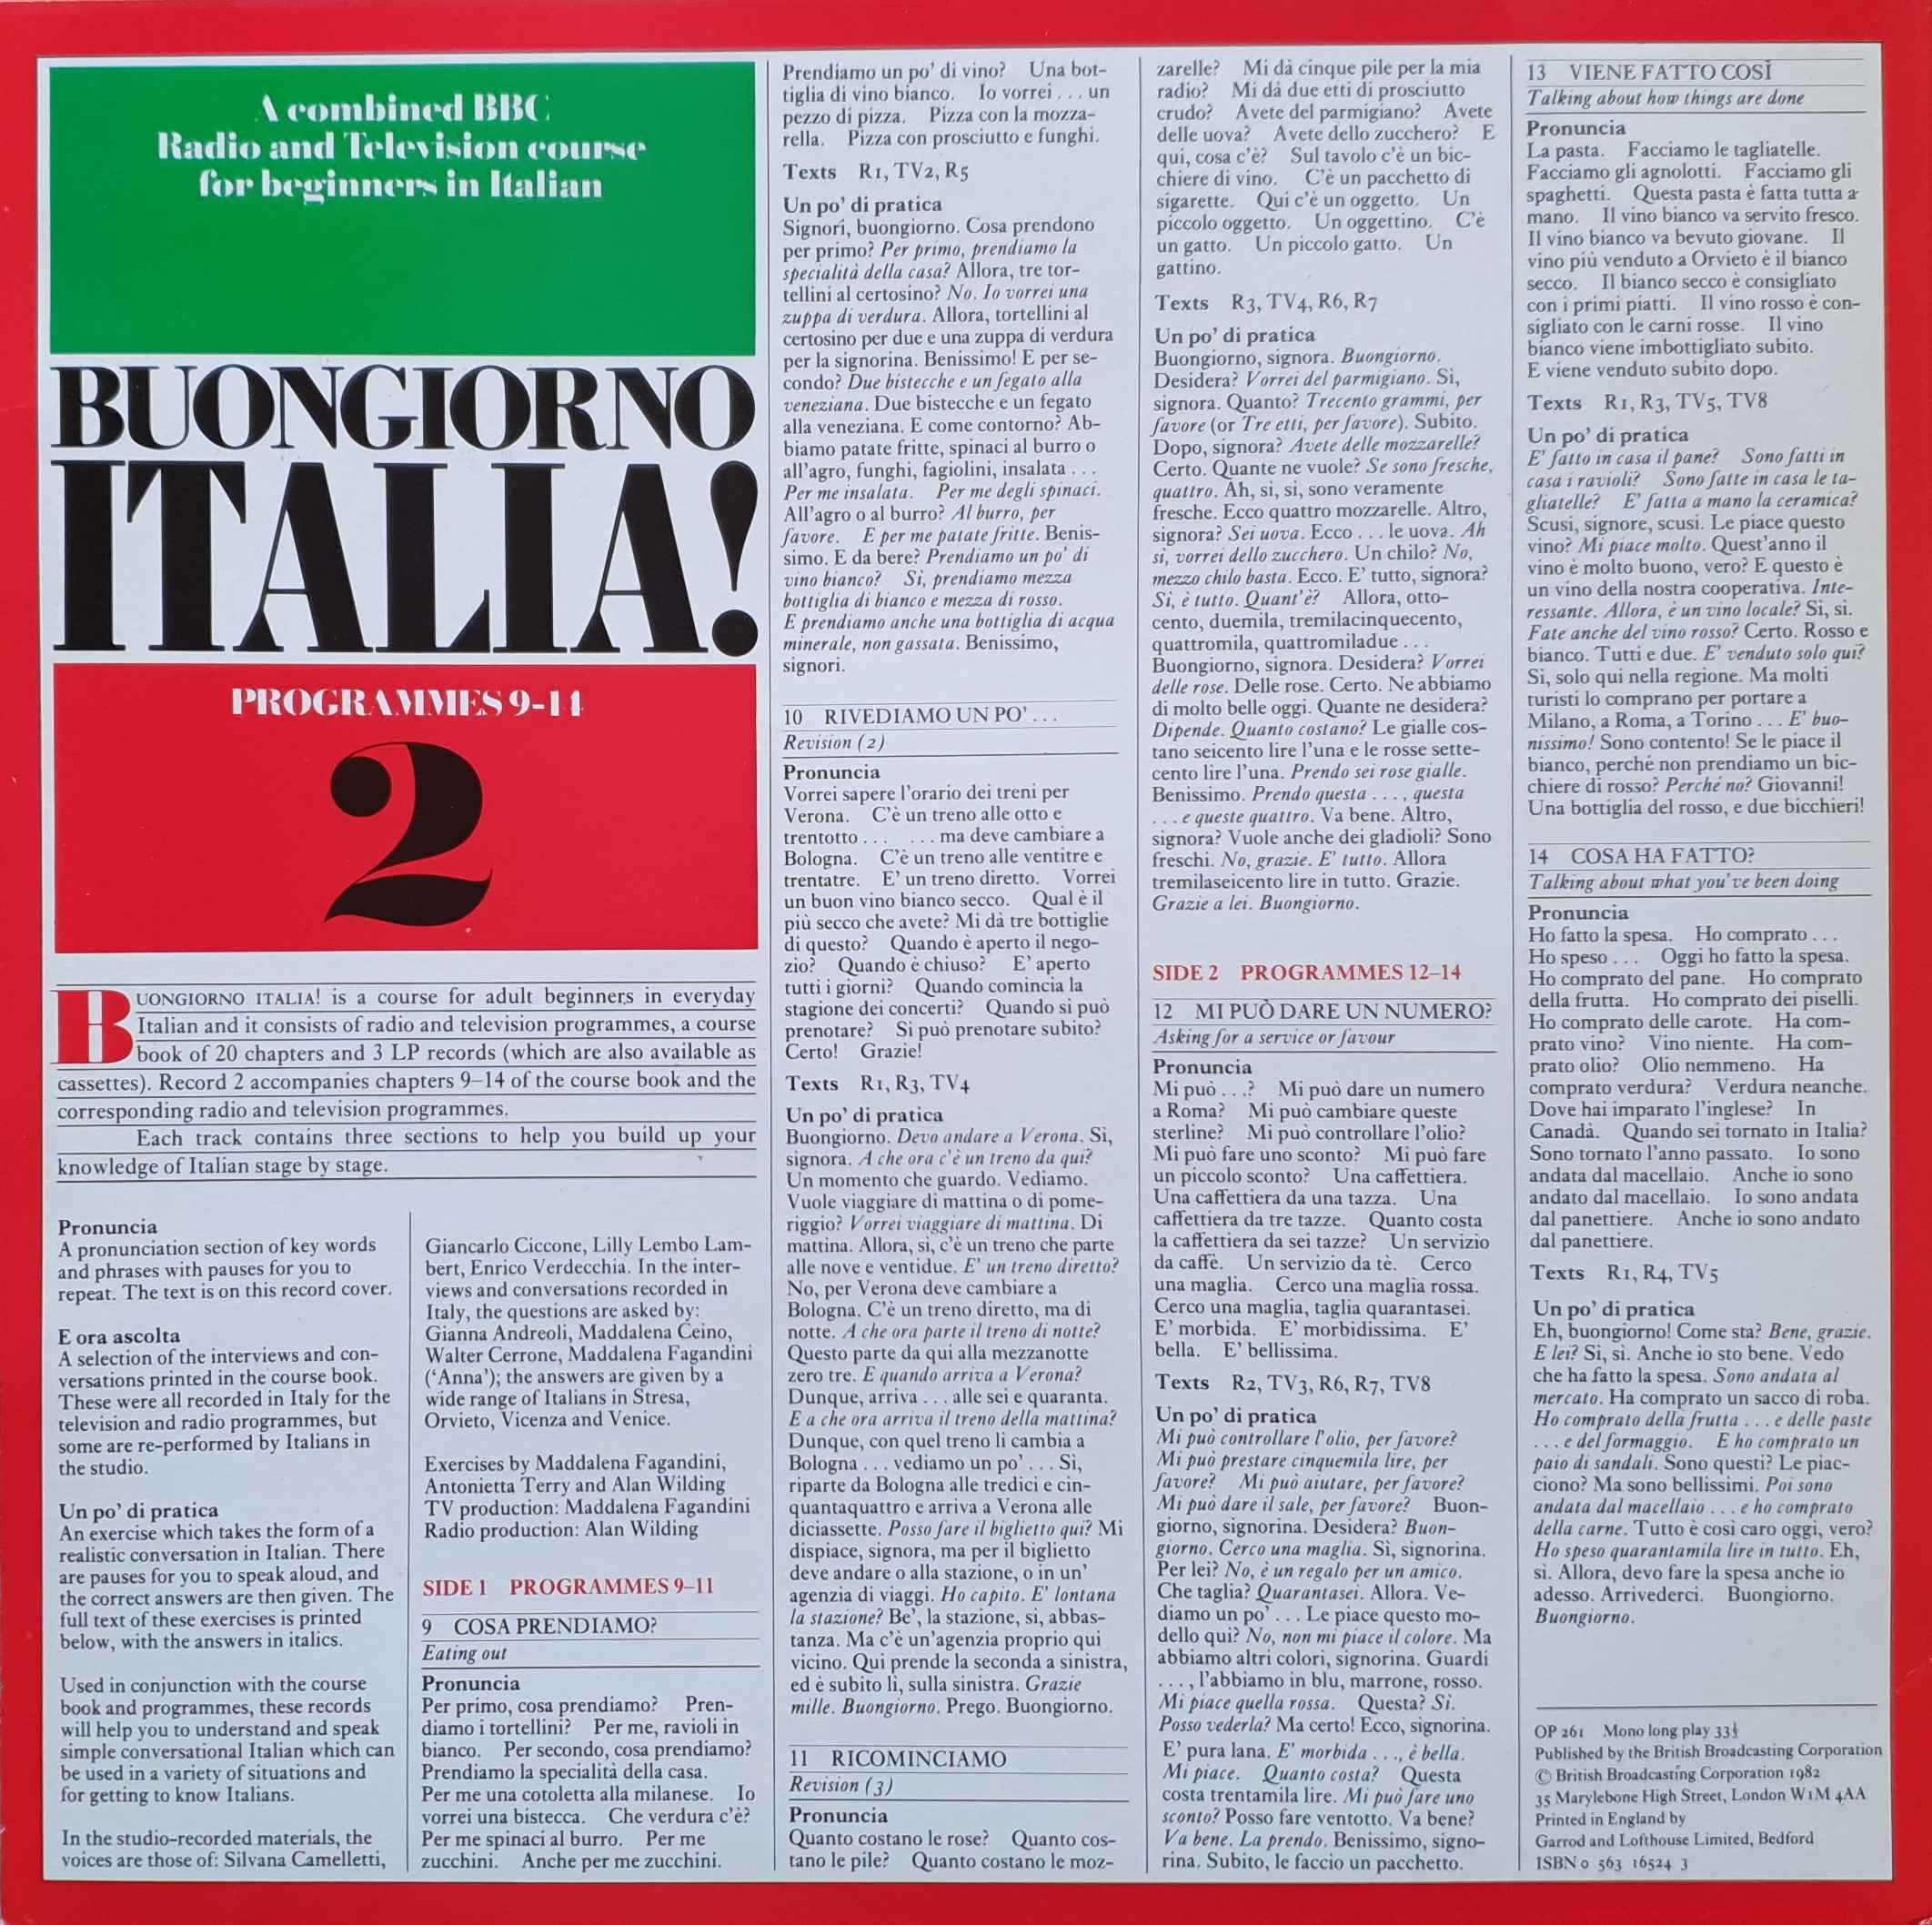 Picture of OP 261 Buongiorno Italia - 9-14 by artist Maddalena Fagandini / Antonietta Terry / Alan Wilding from the BBC records and Tapes library